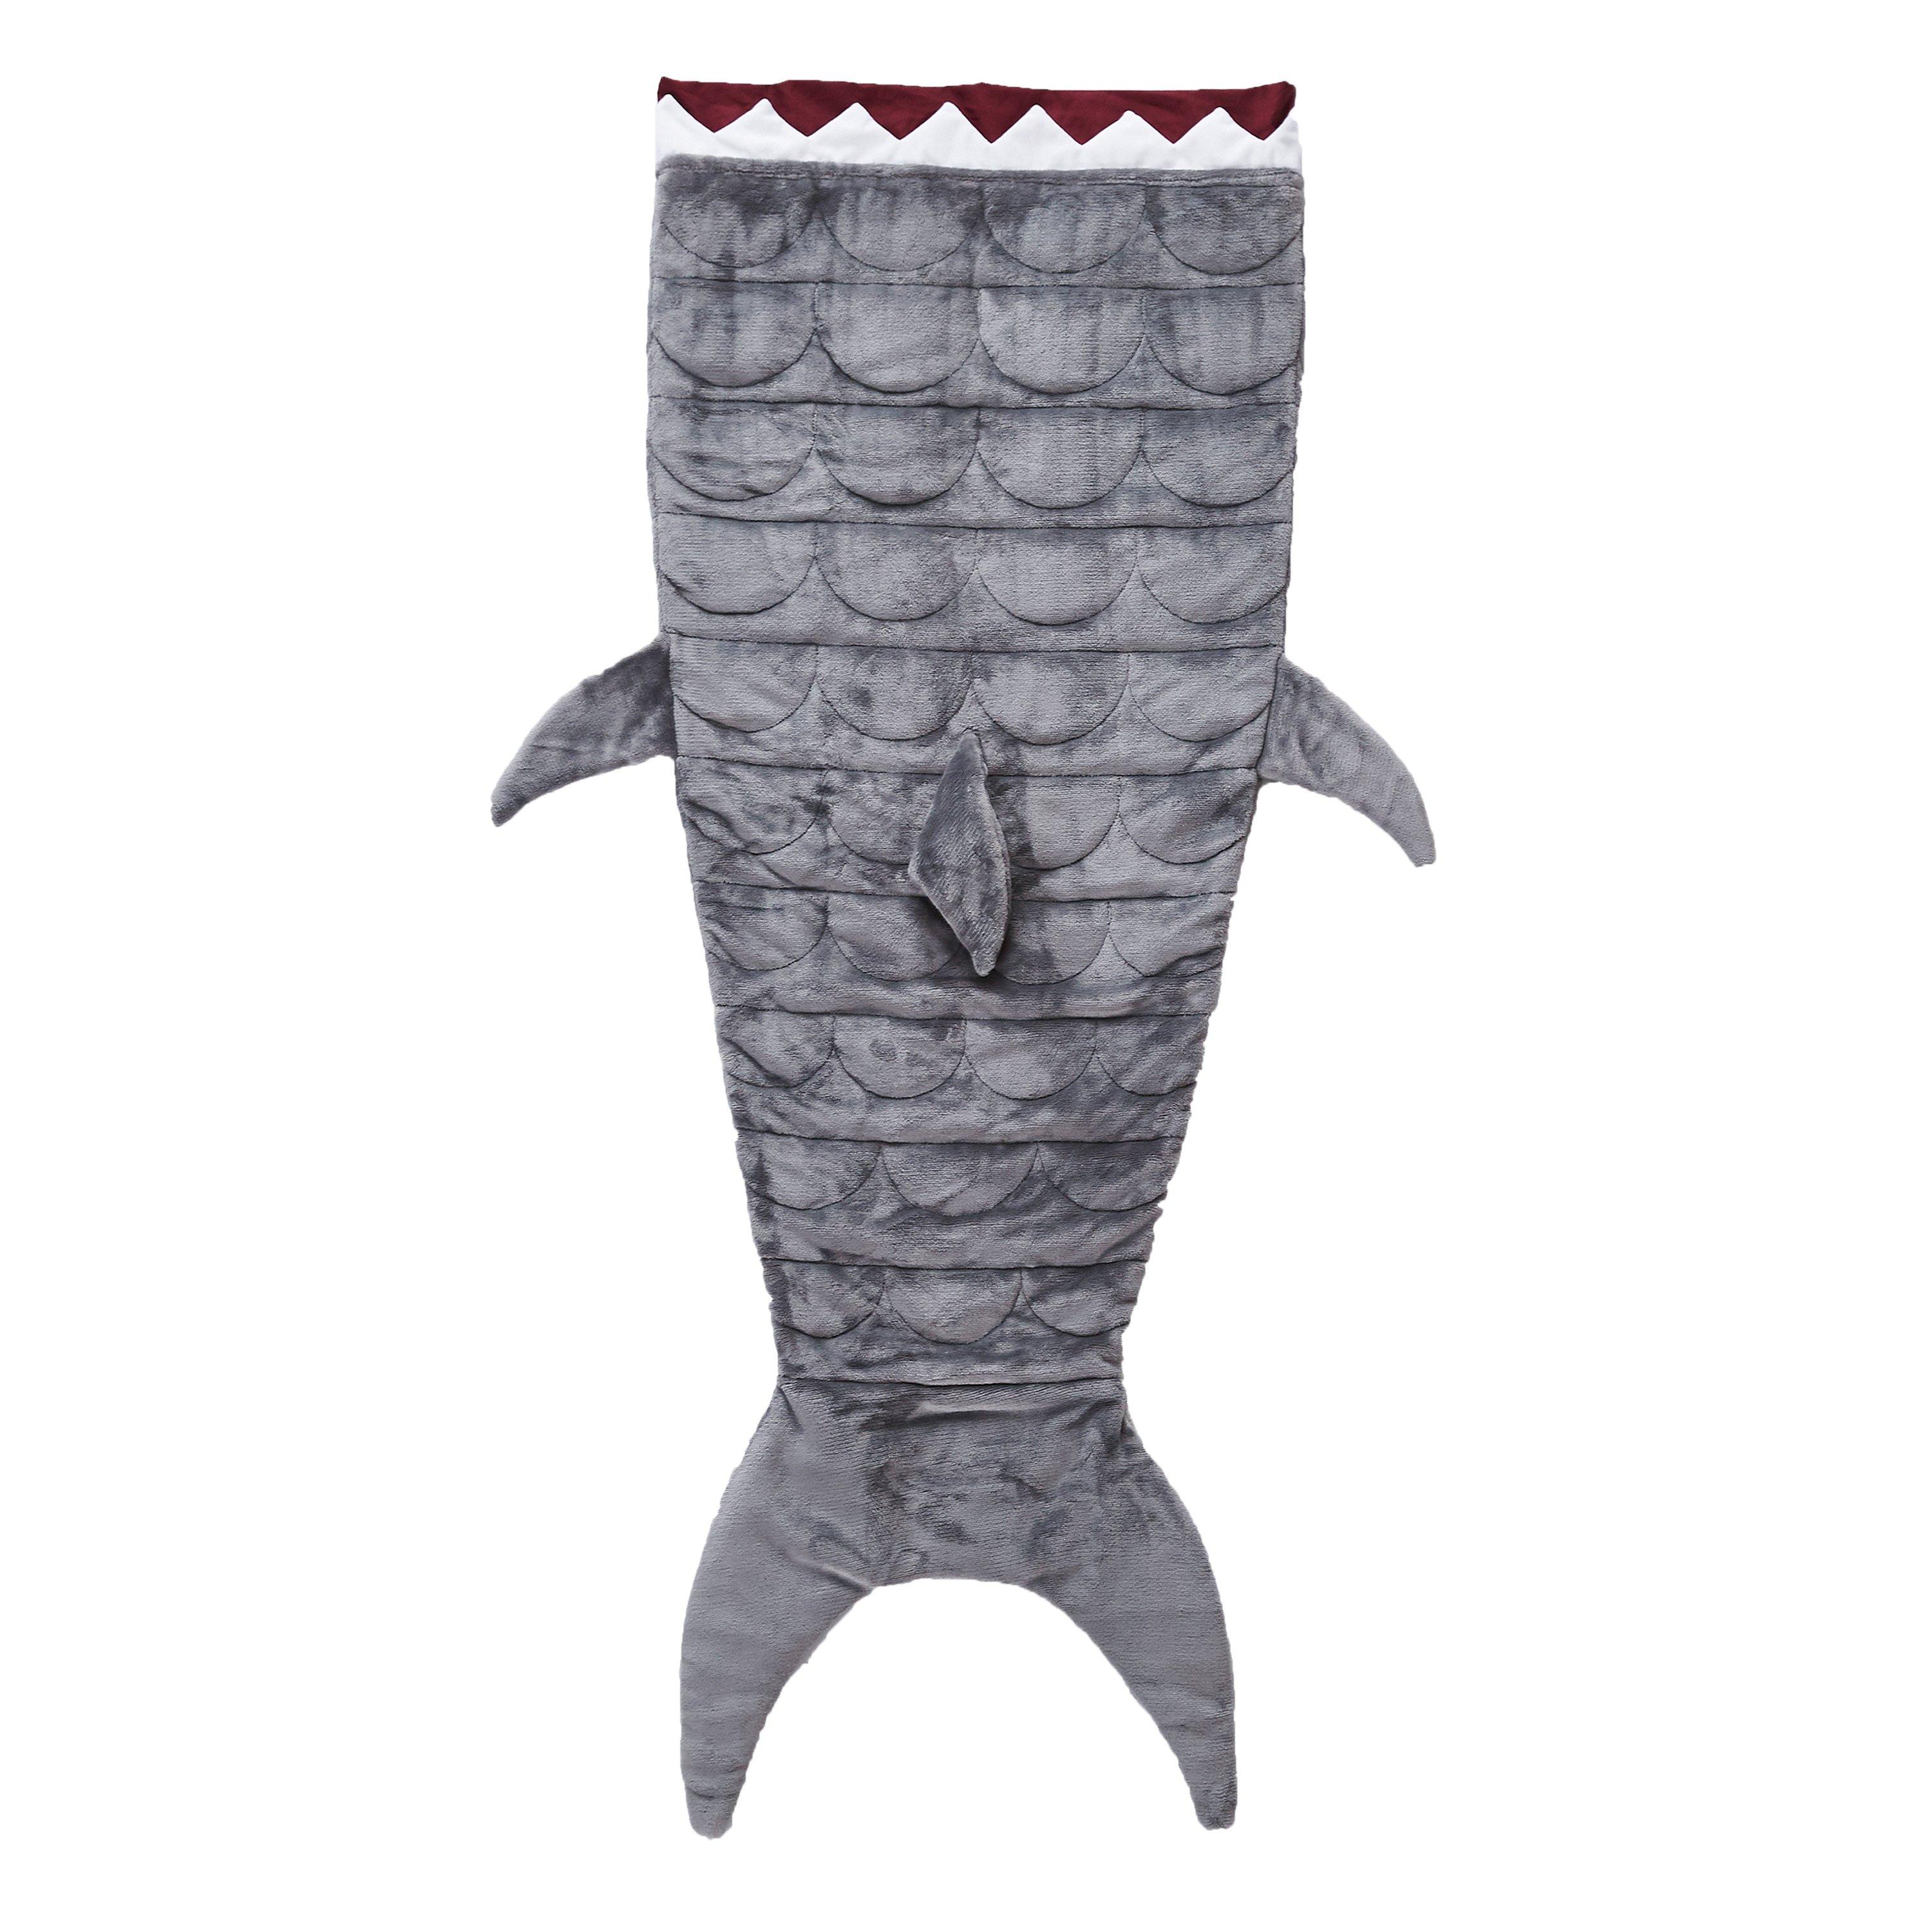 Shark 5 lb Weighted Throw Blanket